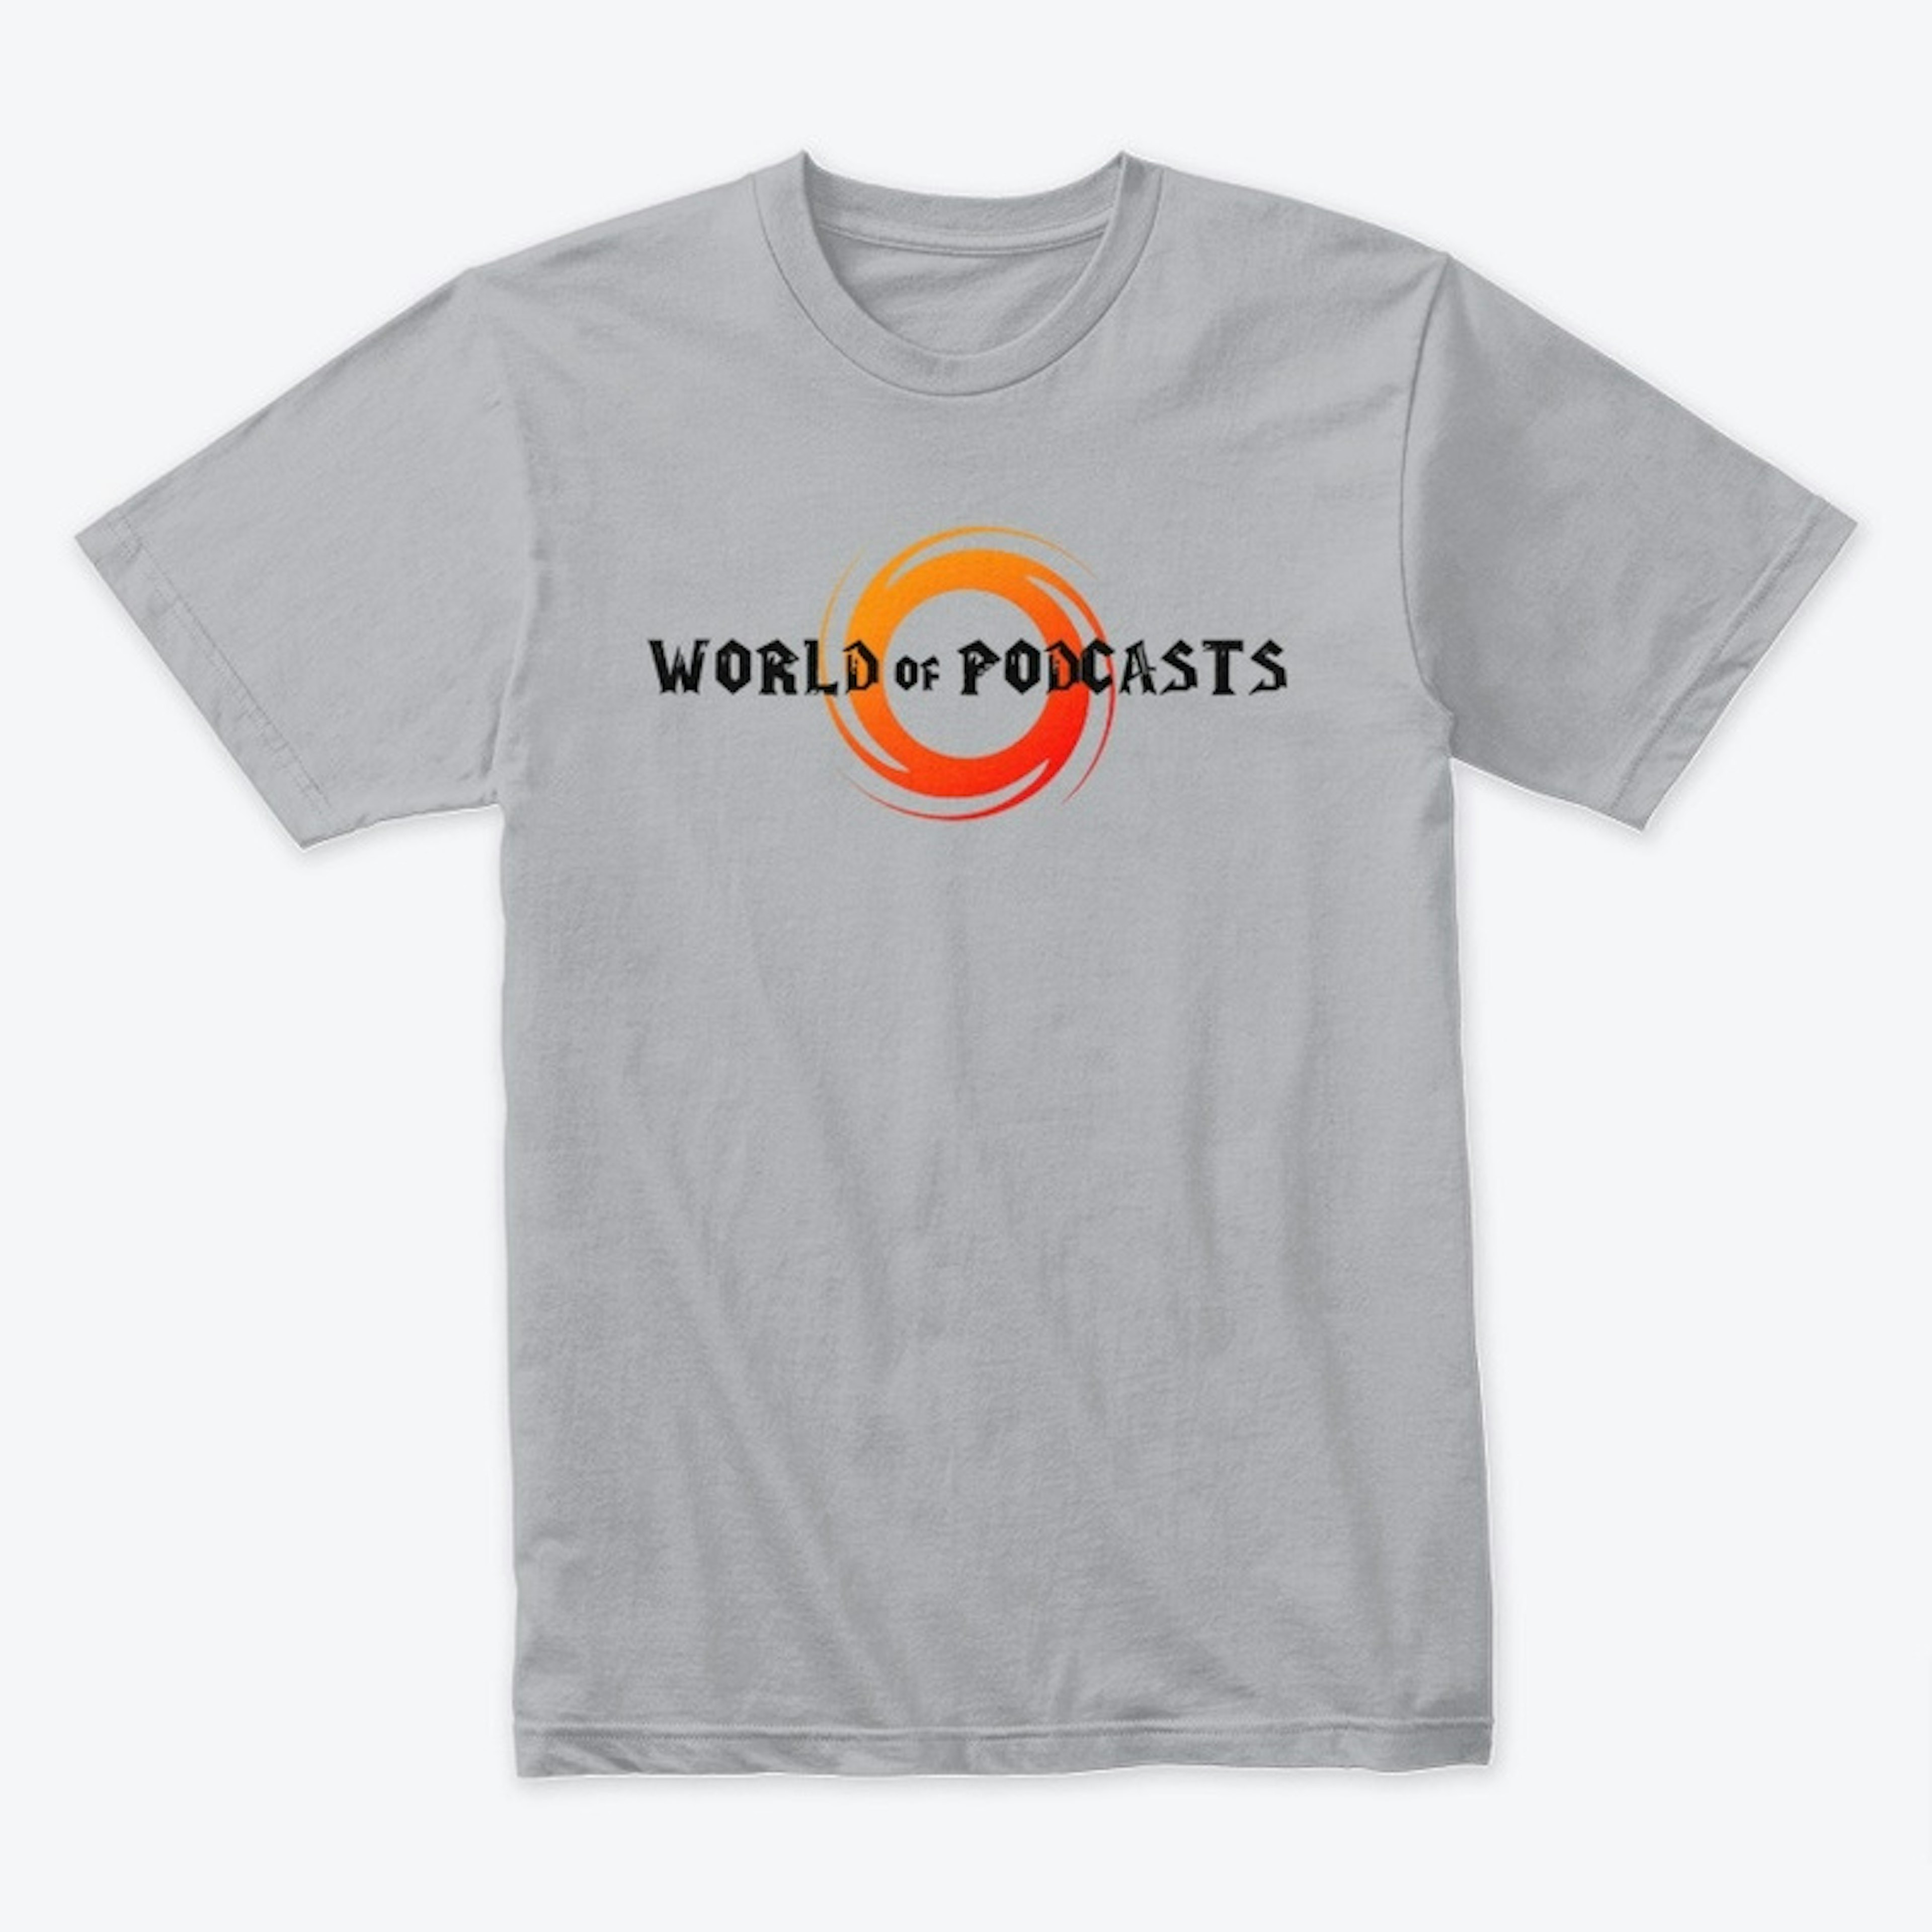 CBTS featuring World of Podcasts